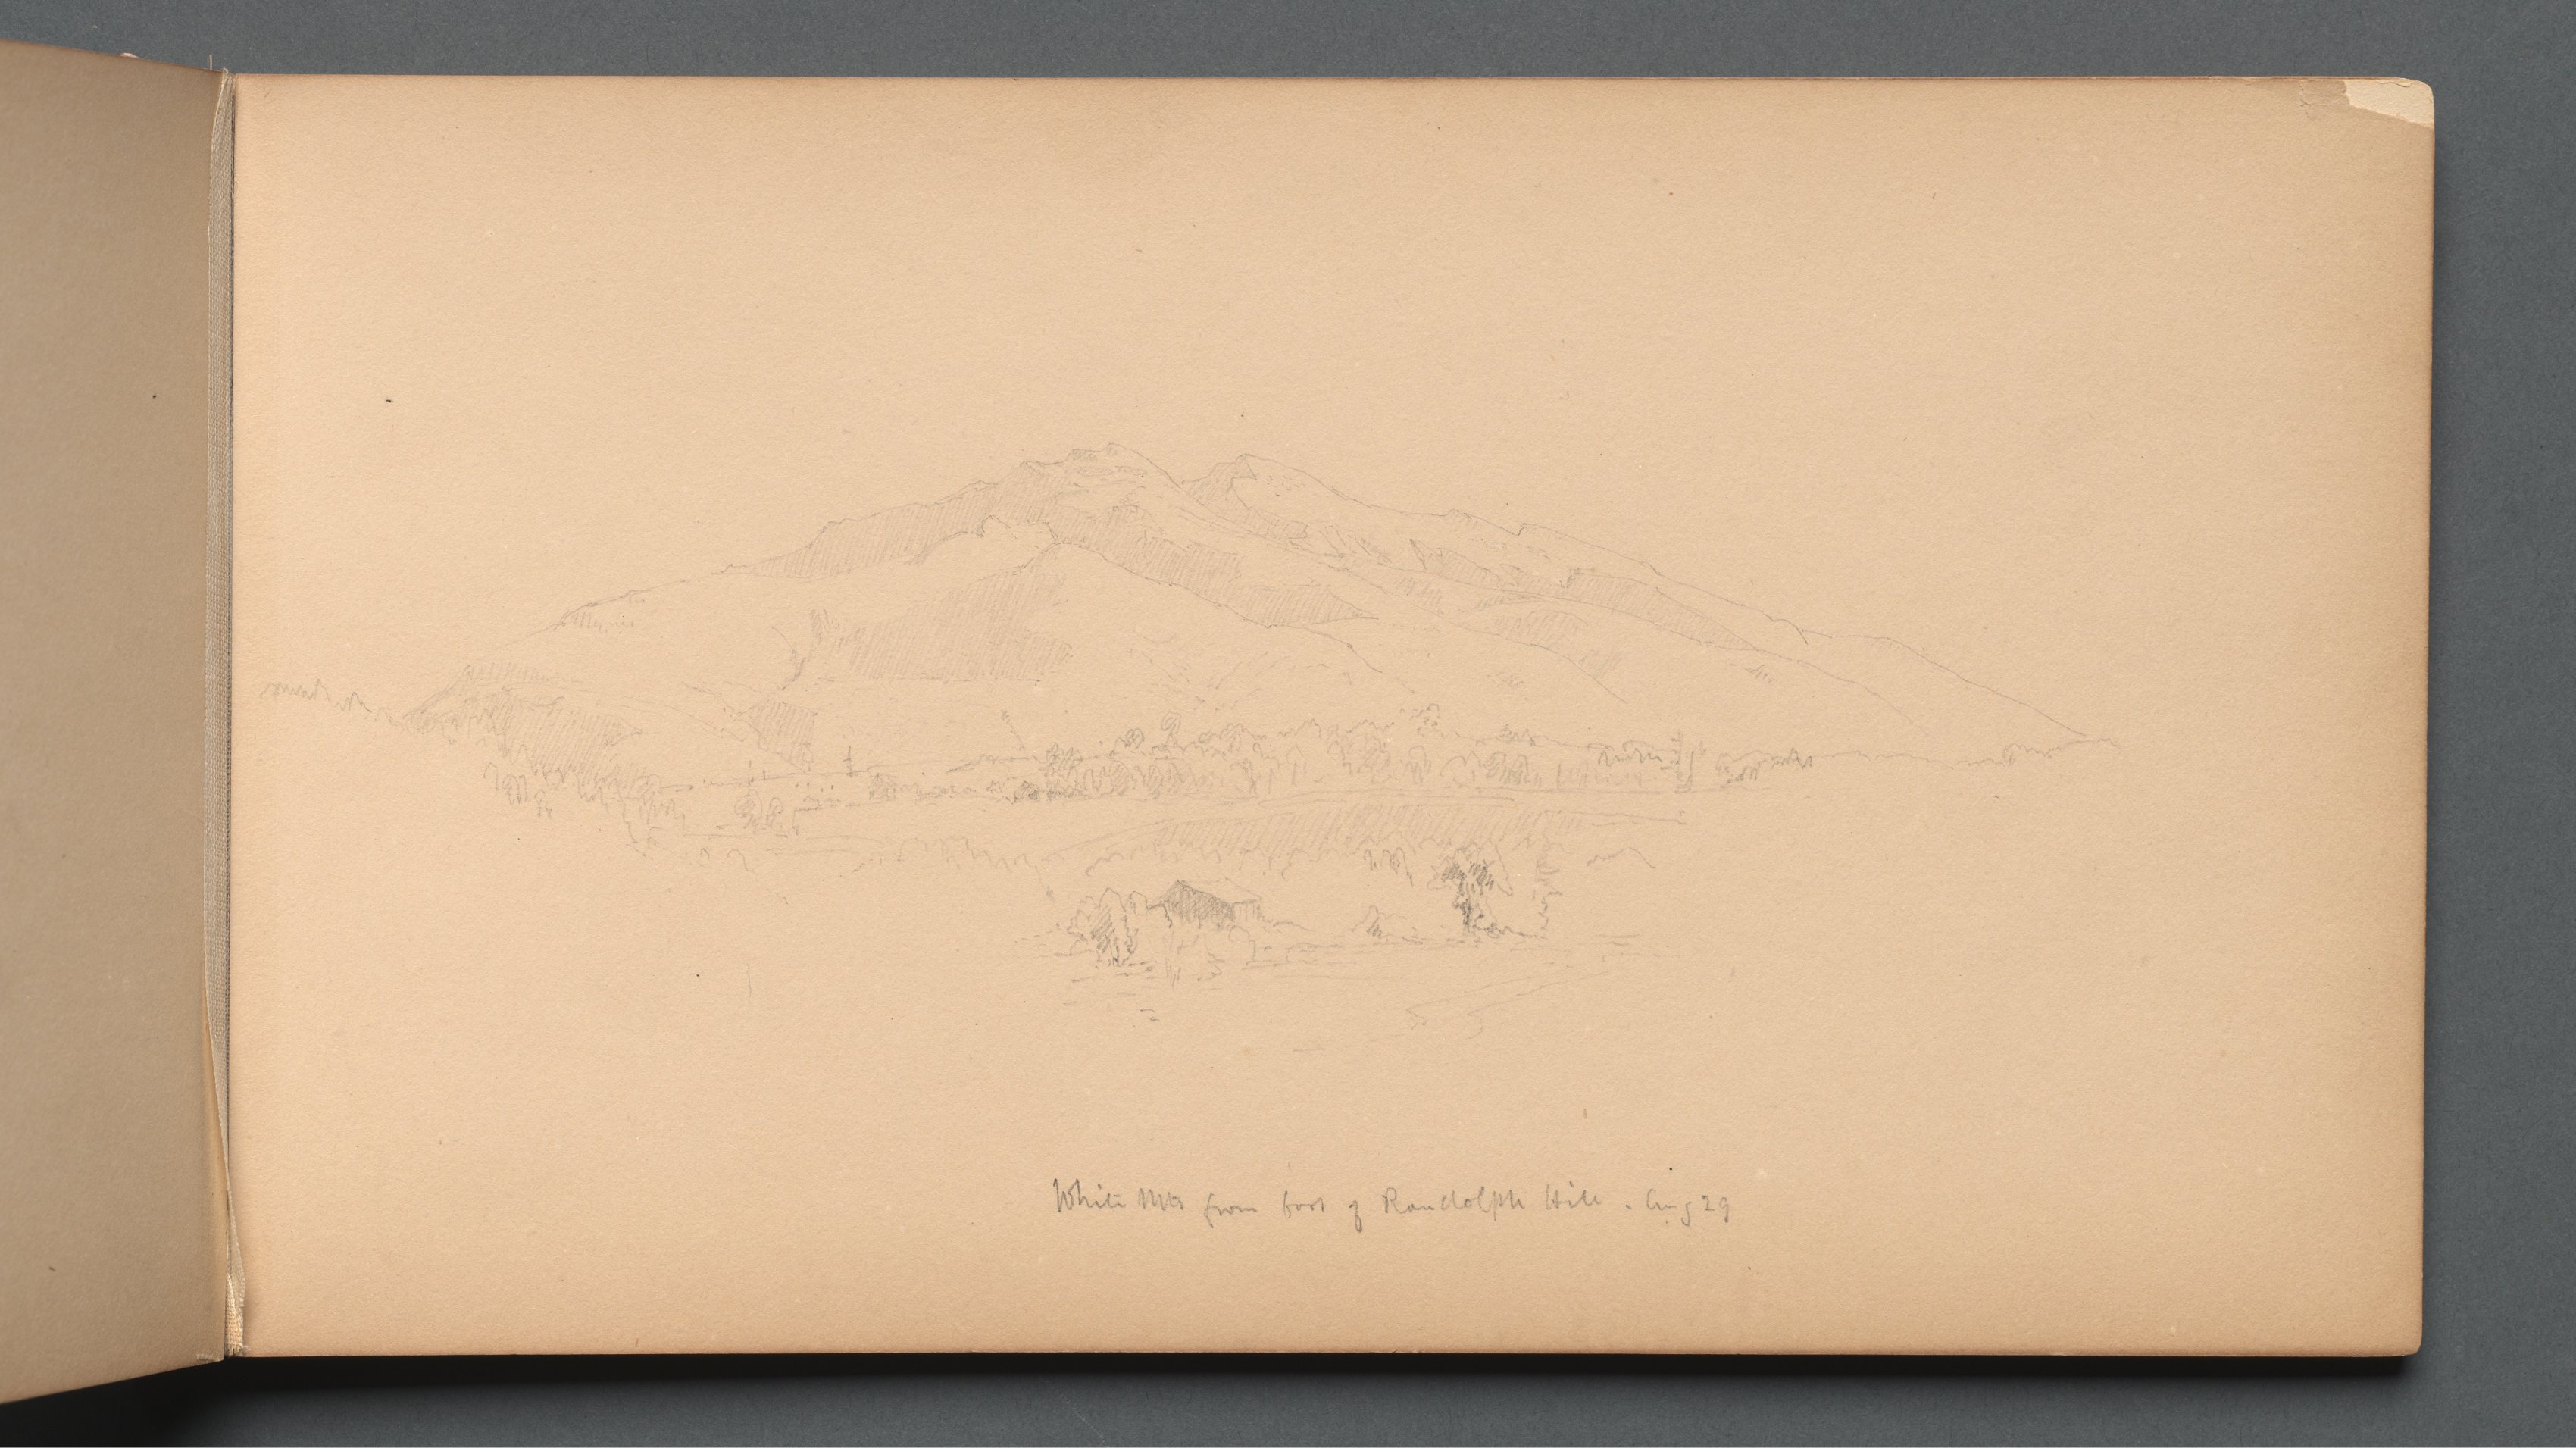 Sketchbook, page 12: "White Mountians from foot of Randolph Hill"